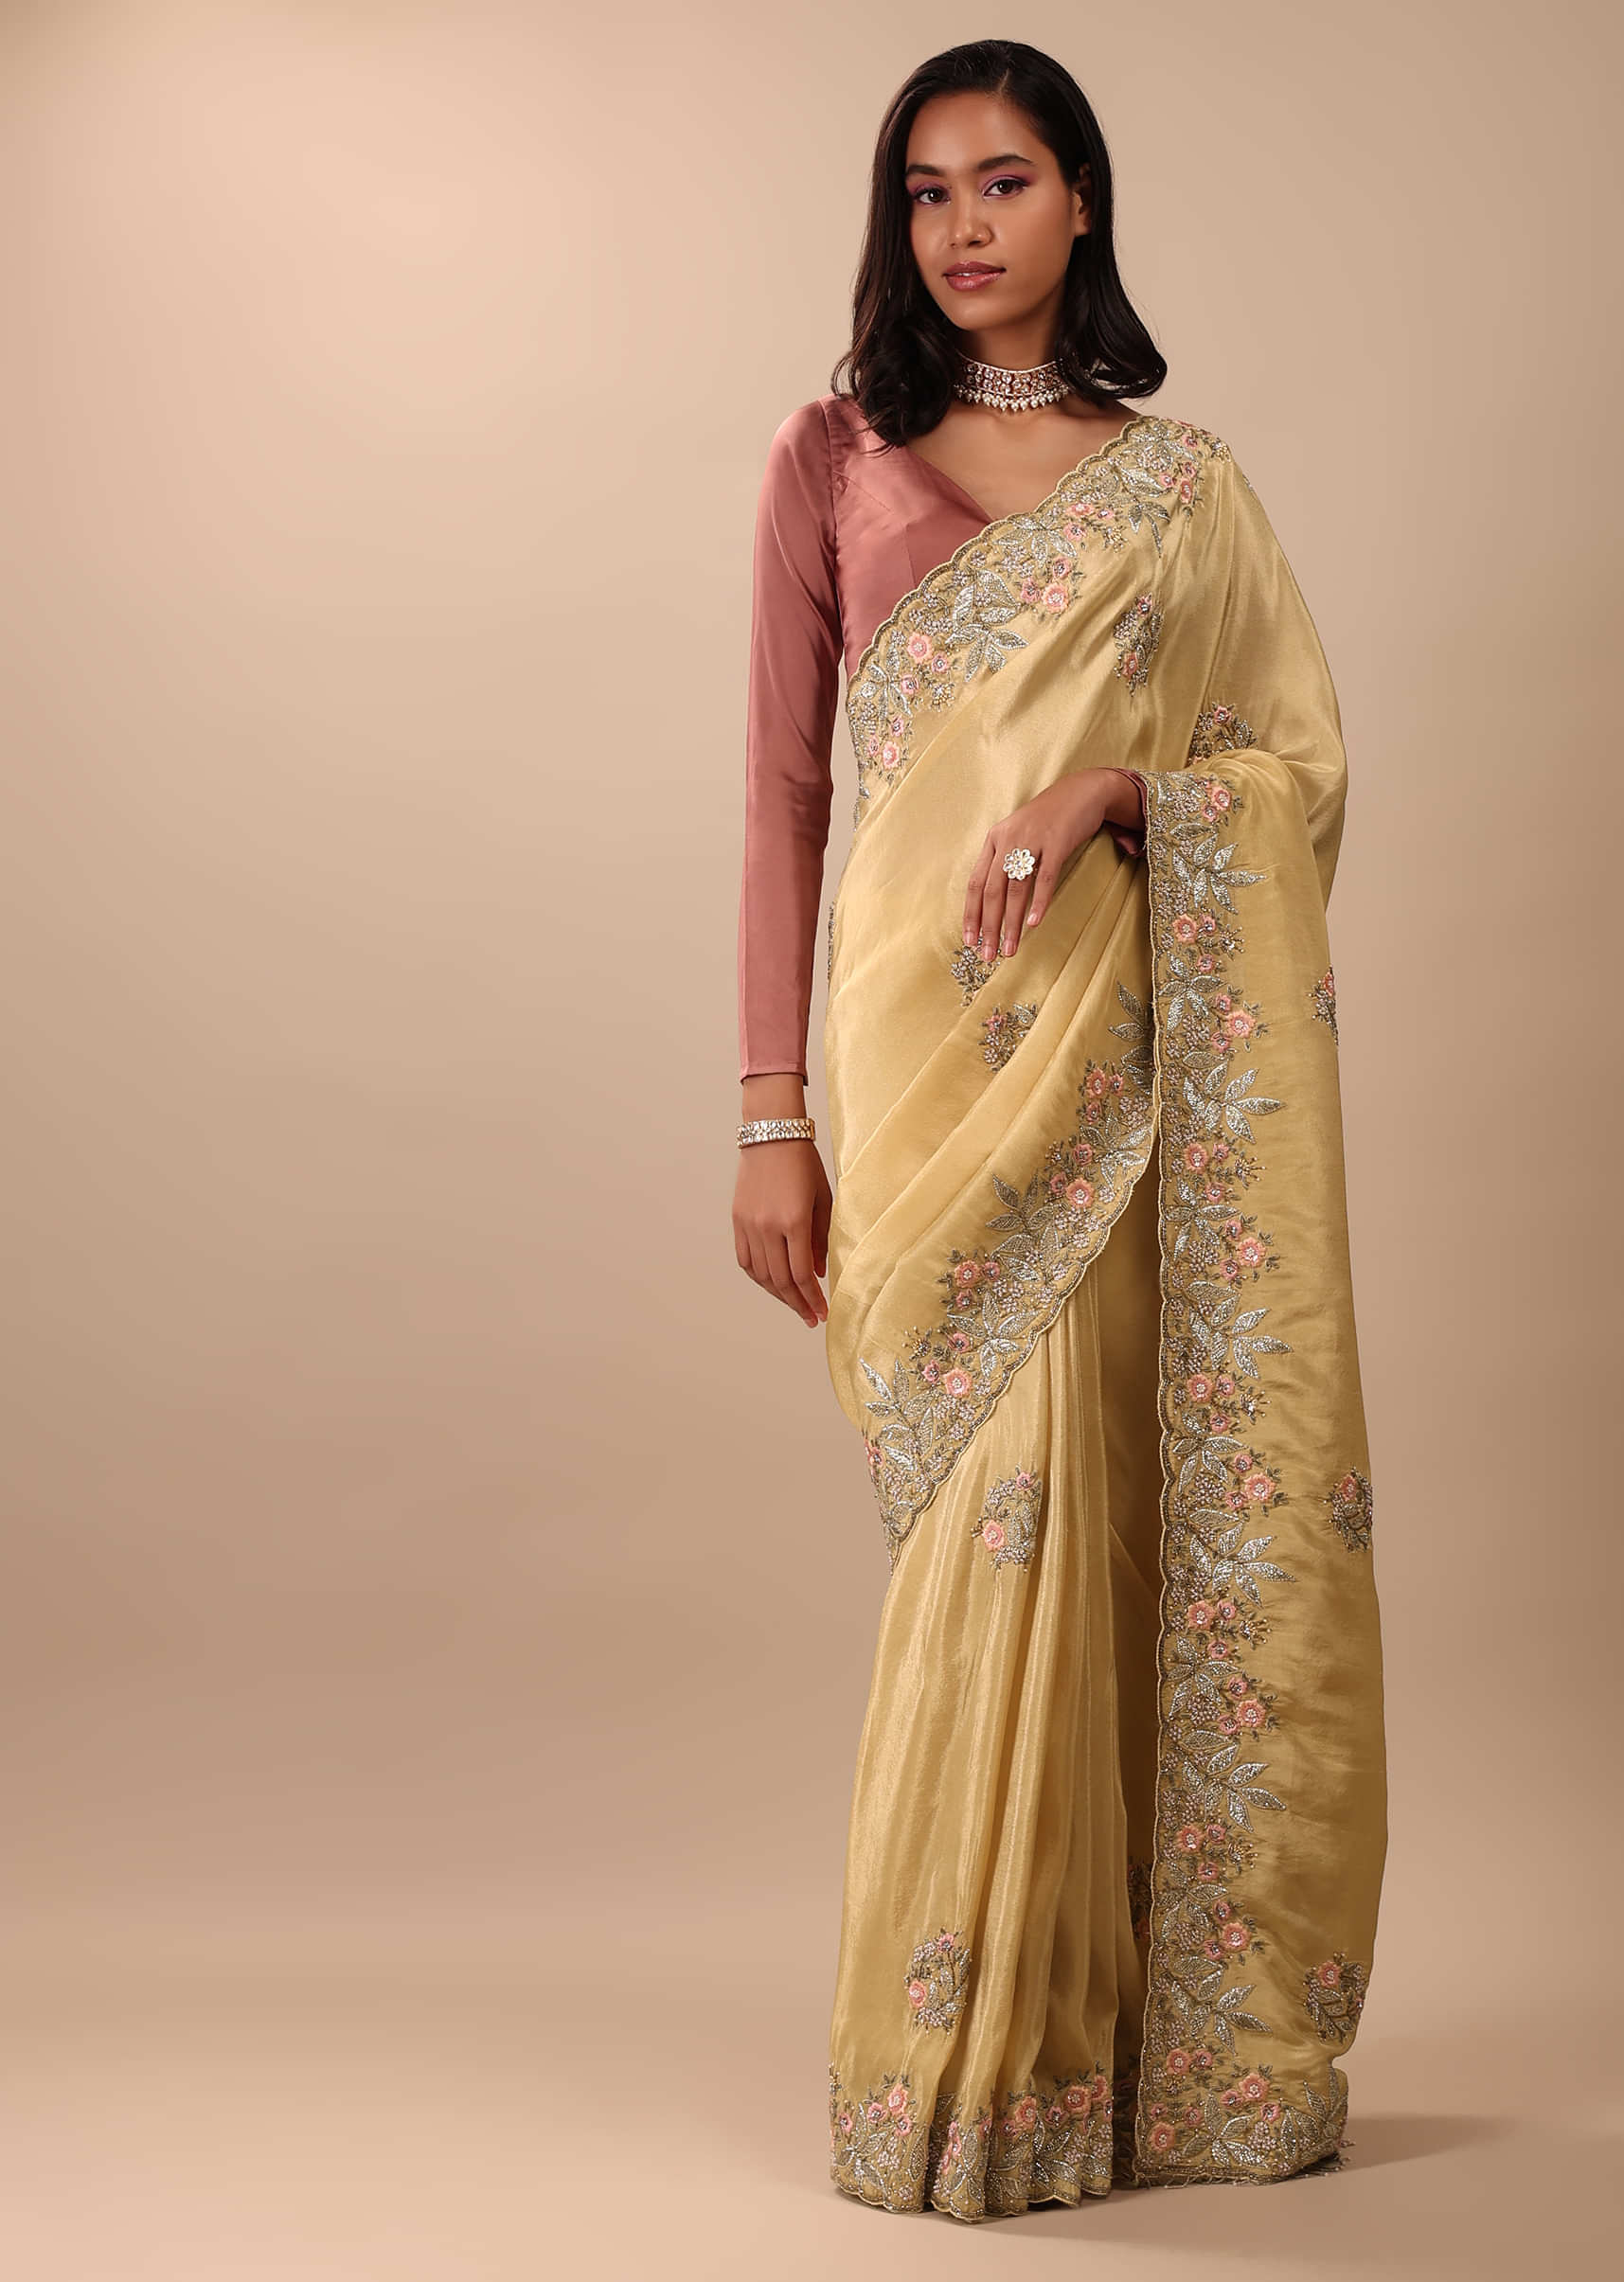 Rich Gold Yellow Saree In Glass Tissue Fabric And Gotta Resham Embroidery With Zardosi, Moti & Sequins